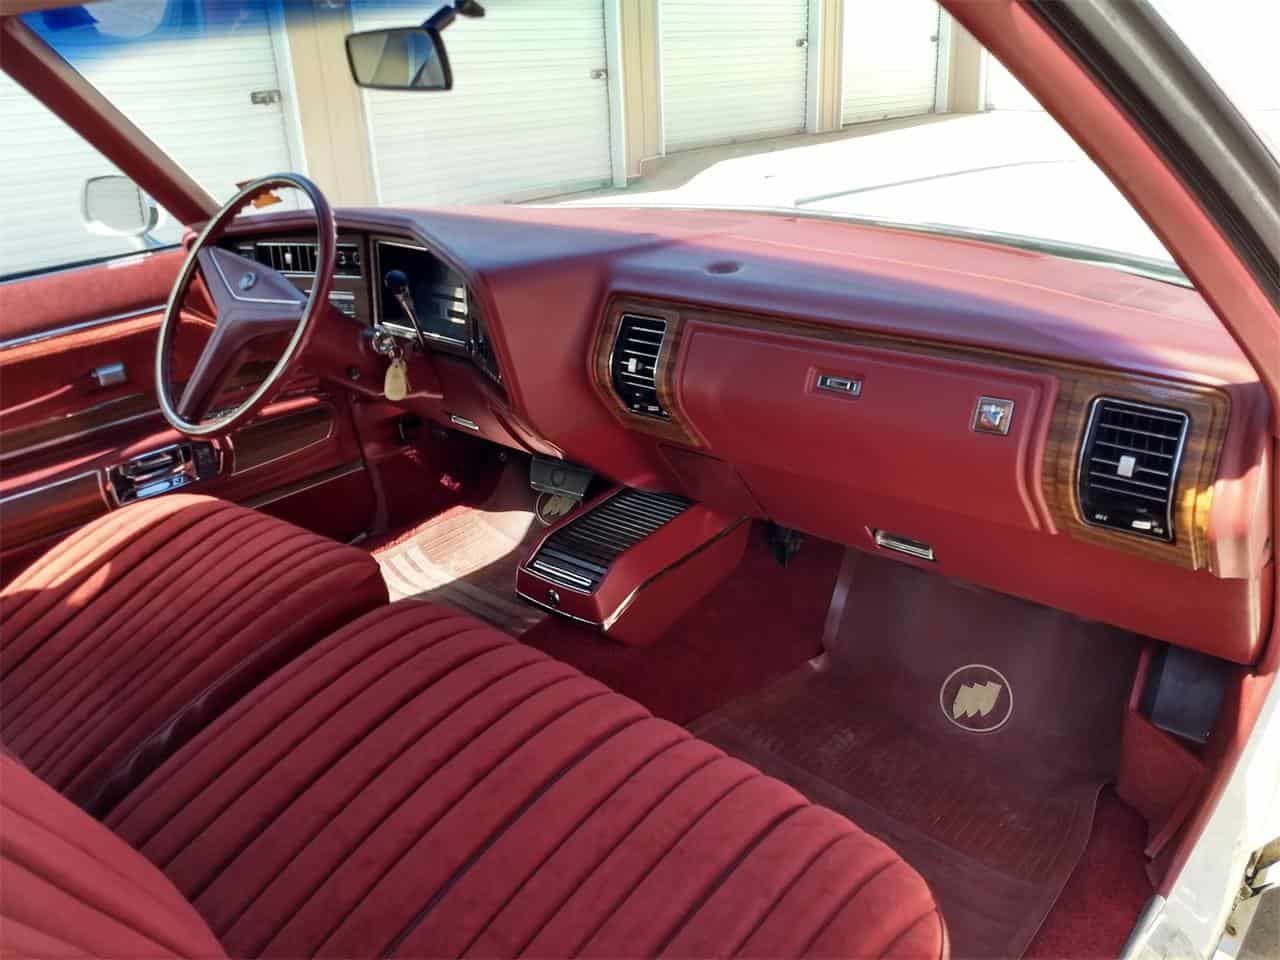 1974 buick electra, Pick of the Day: 1974 Buick Electra 225, ClassicCars.com Journal